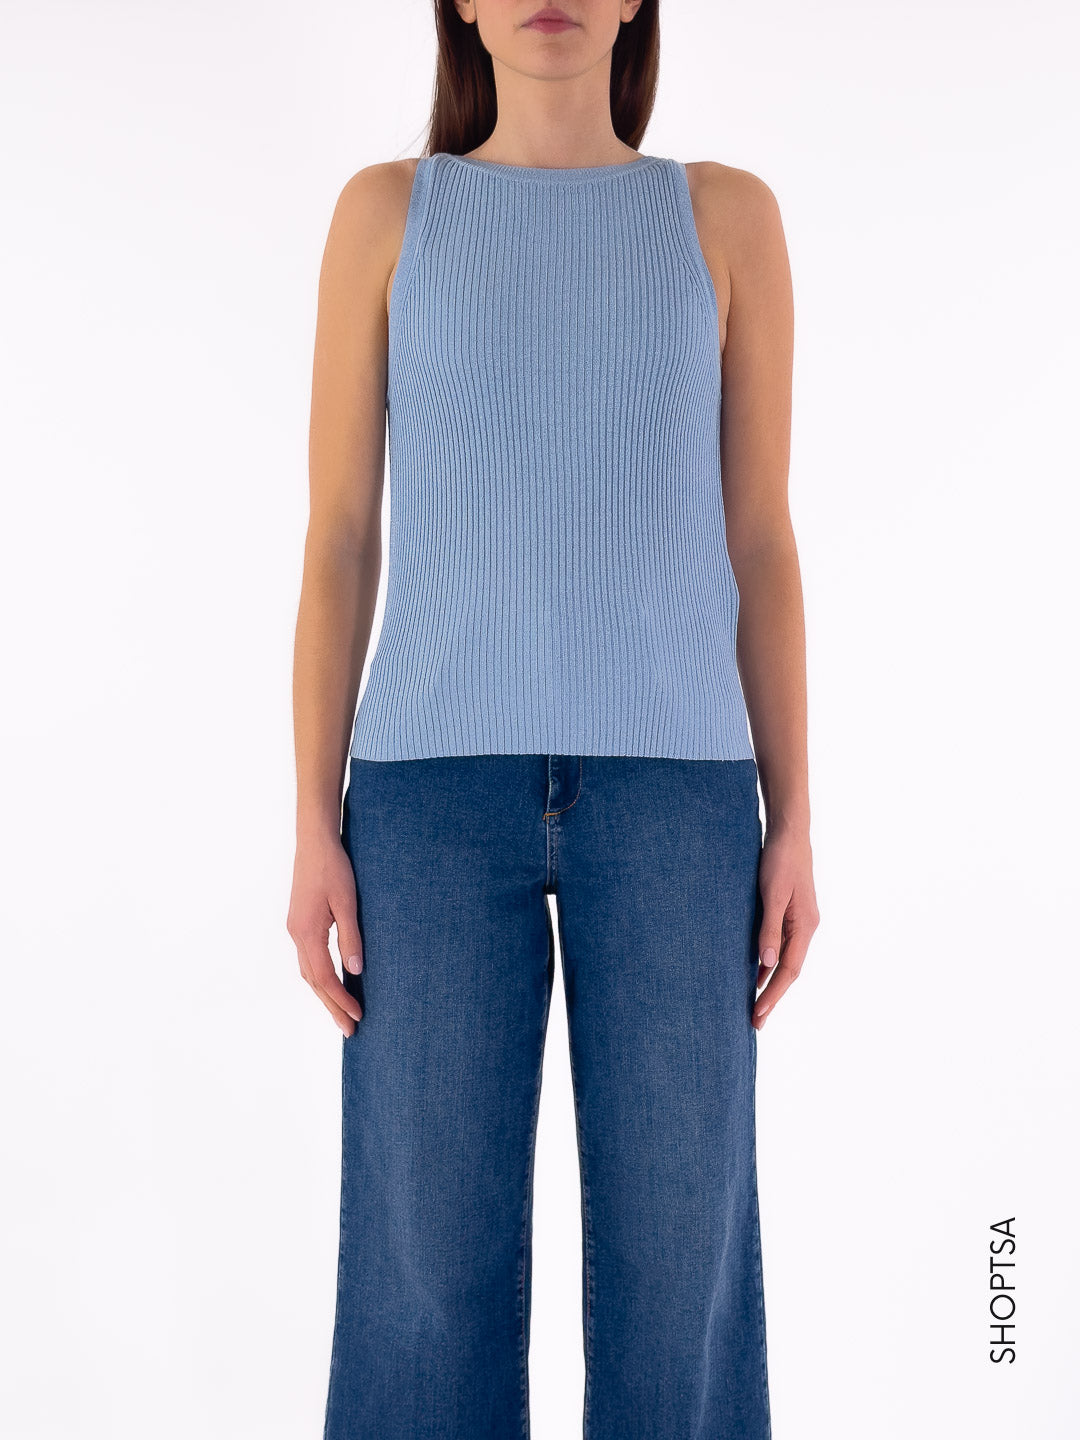 CIGNO knitted top - EMME Marella